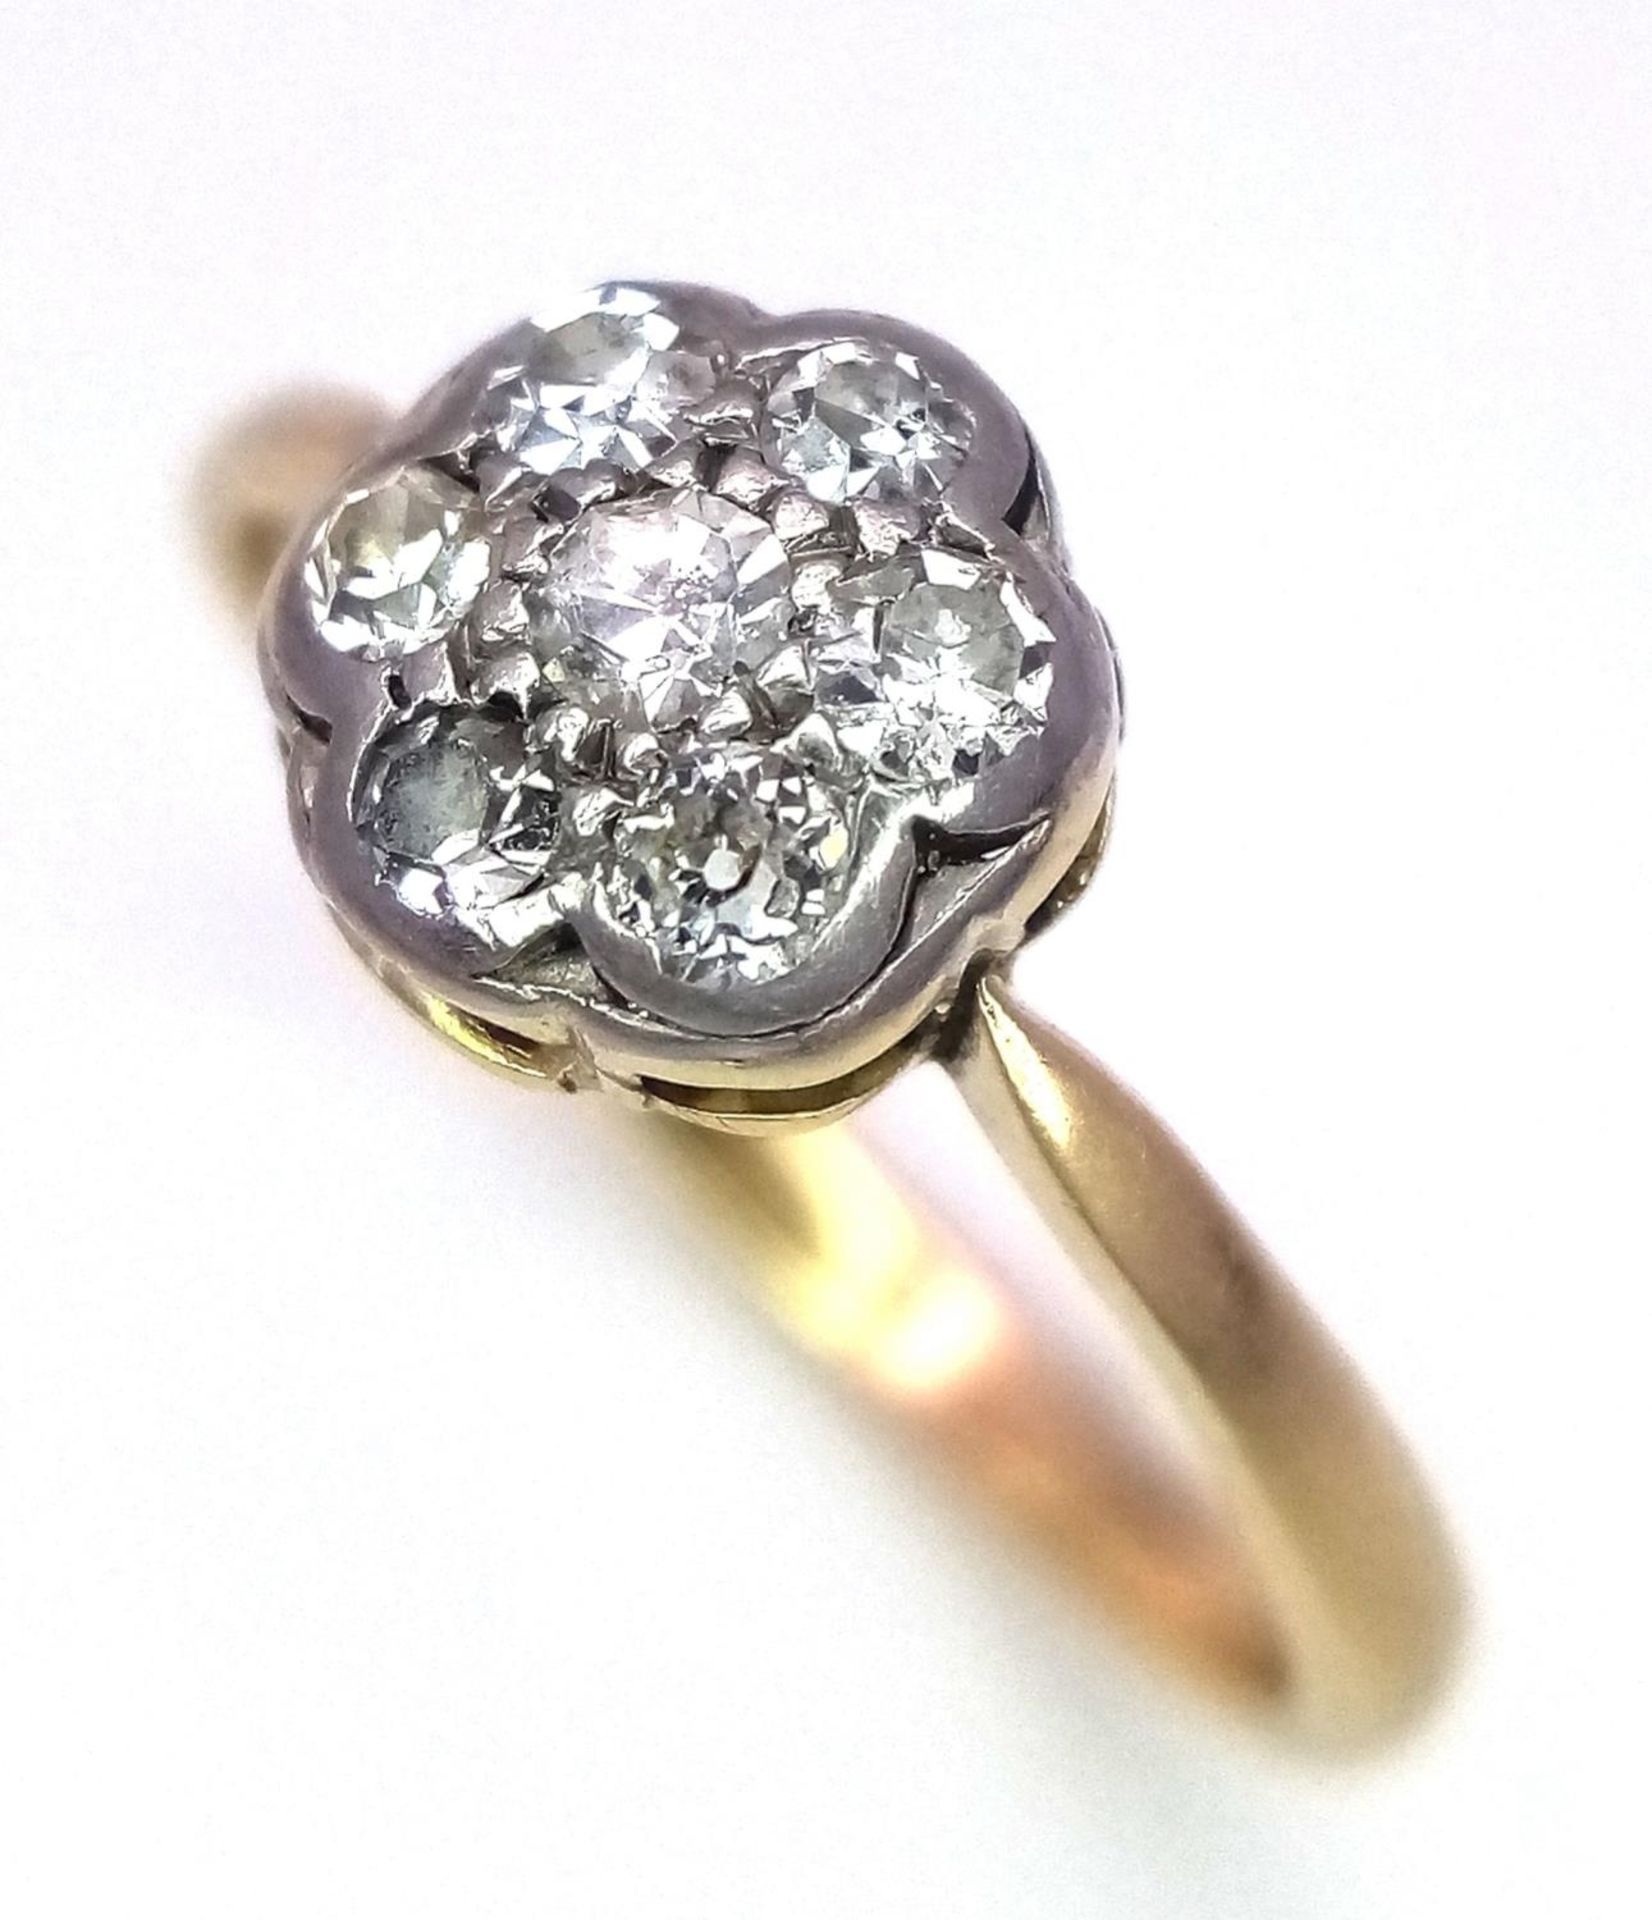 AN 18K YELLOW GOLD & PLATINUM VINTAGE OLD CUT DIAMOND CLUSTER RING. 0.25ctw, size M, 2g total - Image 3 of 5